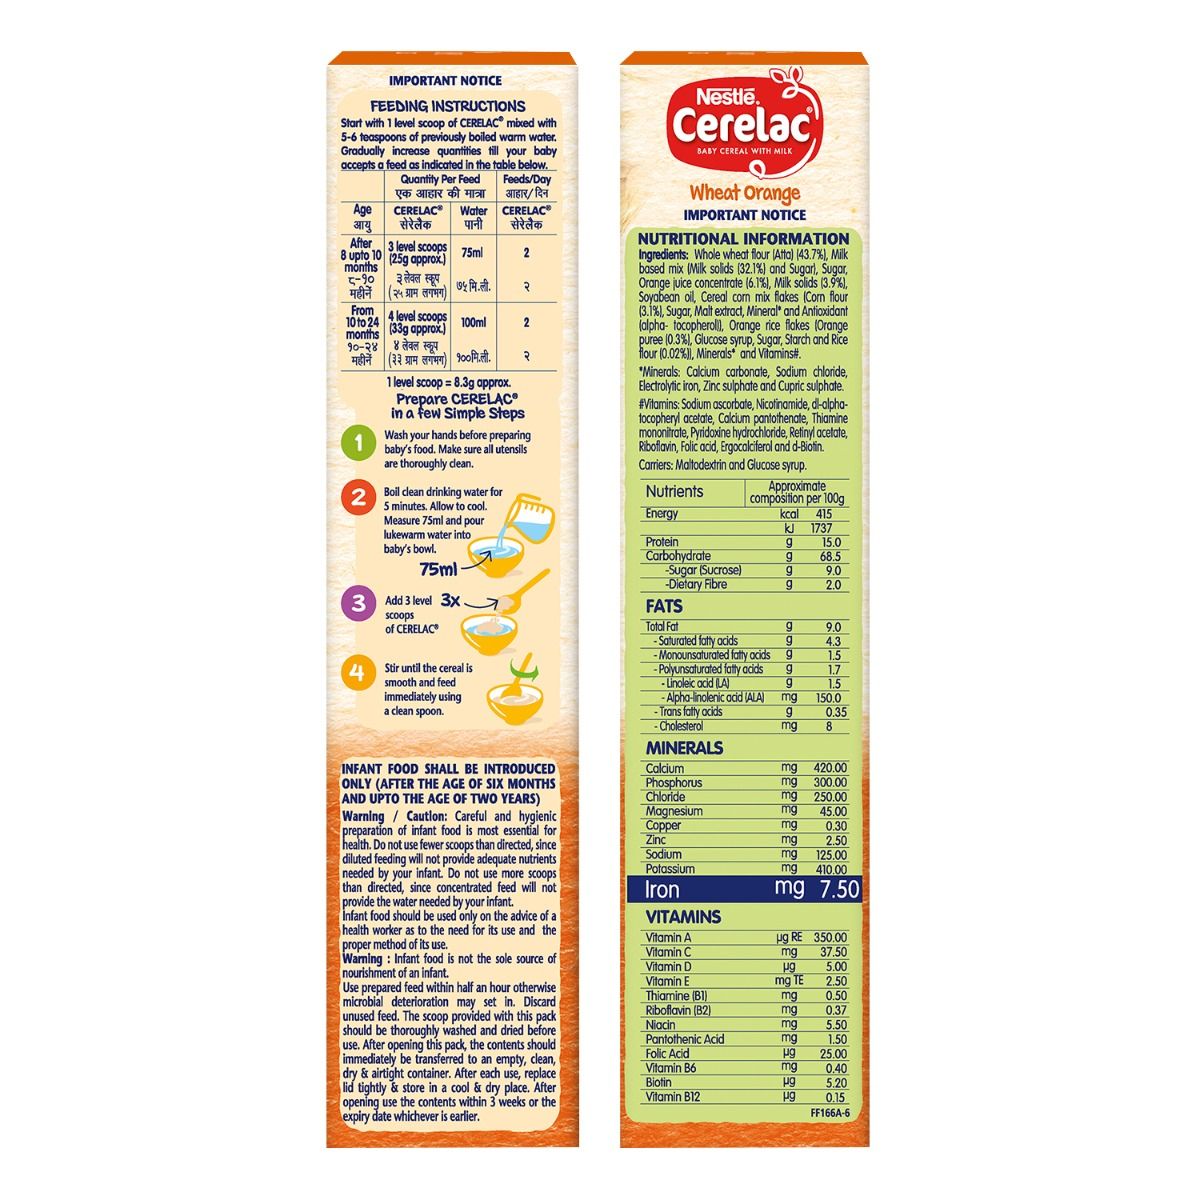 Nestle Cerelac Wheat Orange Baby Cereal, 8 to 12 Months, 300 gm Refill Pack, Pack of 1 